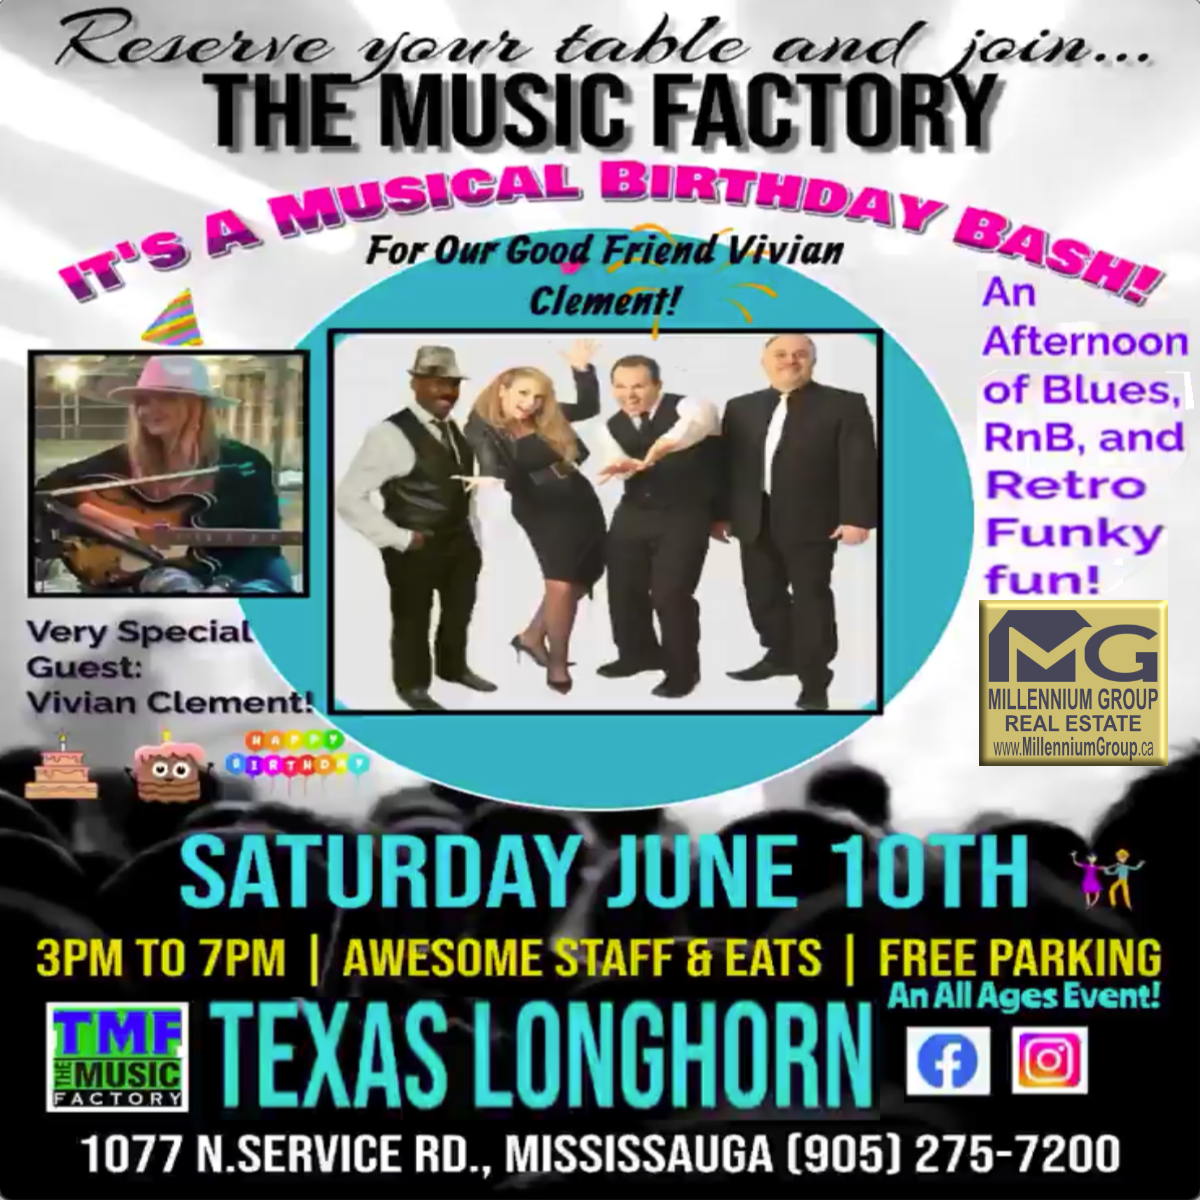 Craving live music? How about The Music Factory at Texas Longhorn this Saturday afternoon? 🎶

#MusicFactoryBand #SupportLiveMusic #MississaugaEvents #KendraCutroneBroker #TonyCutroneRealtor #MillenniumGroupRealEstate #MillenniumGroup #BestRealtorMississauga #MGroupRealtor #MGRE